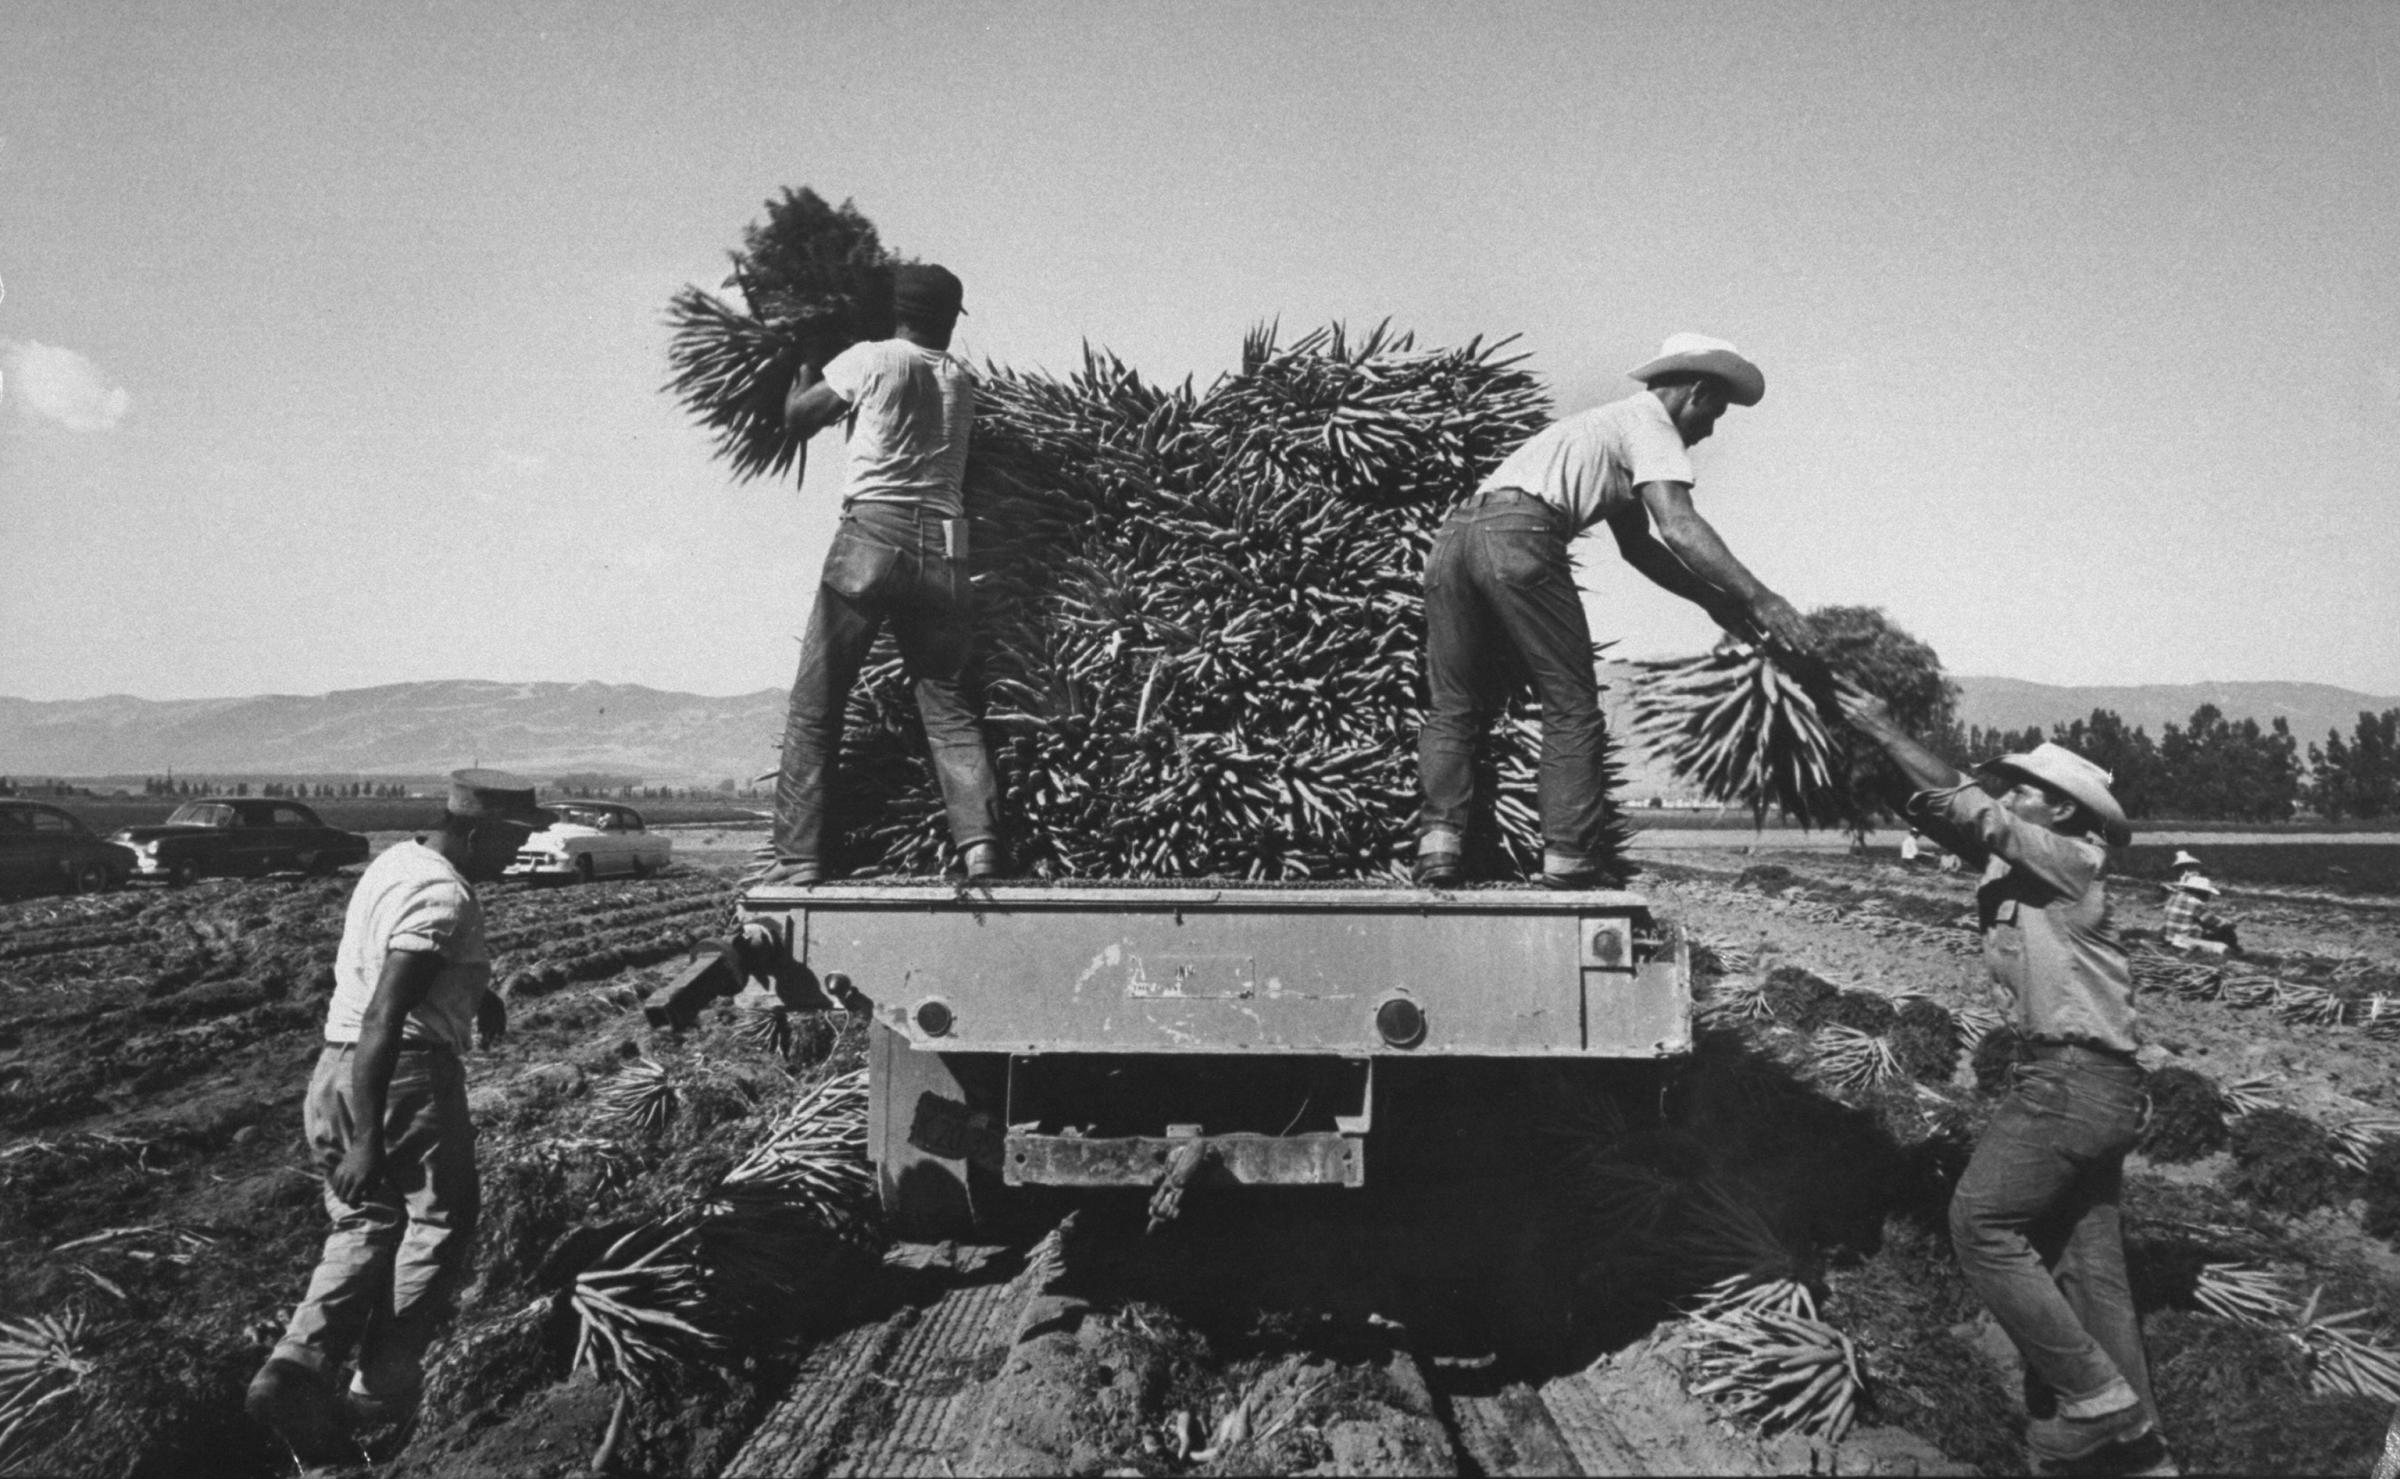 Migrant farm workers load picked carrots into a truck, California, 1959.